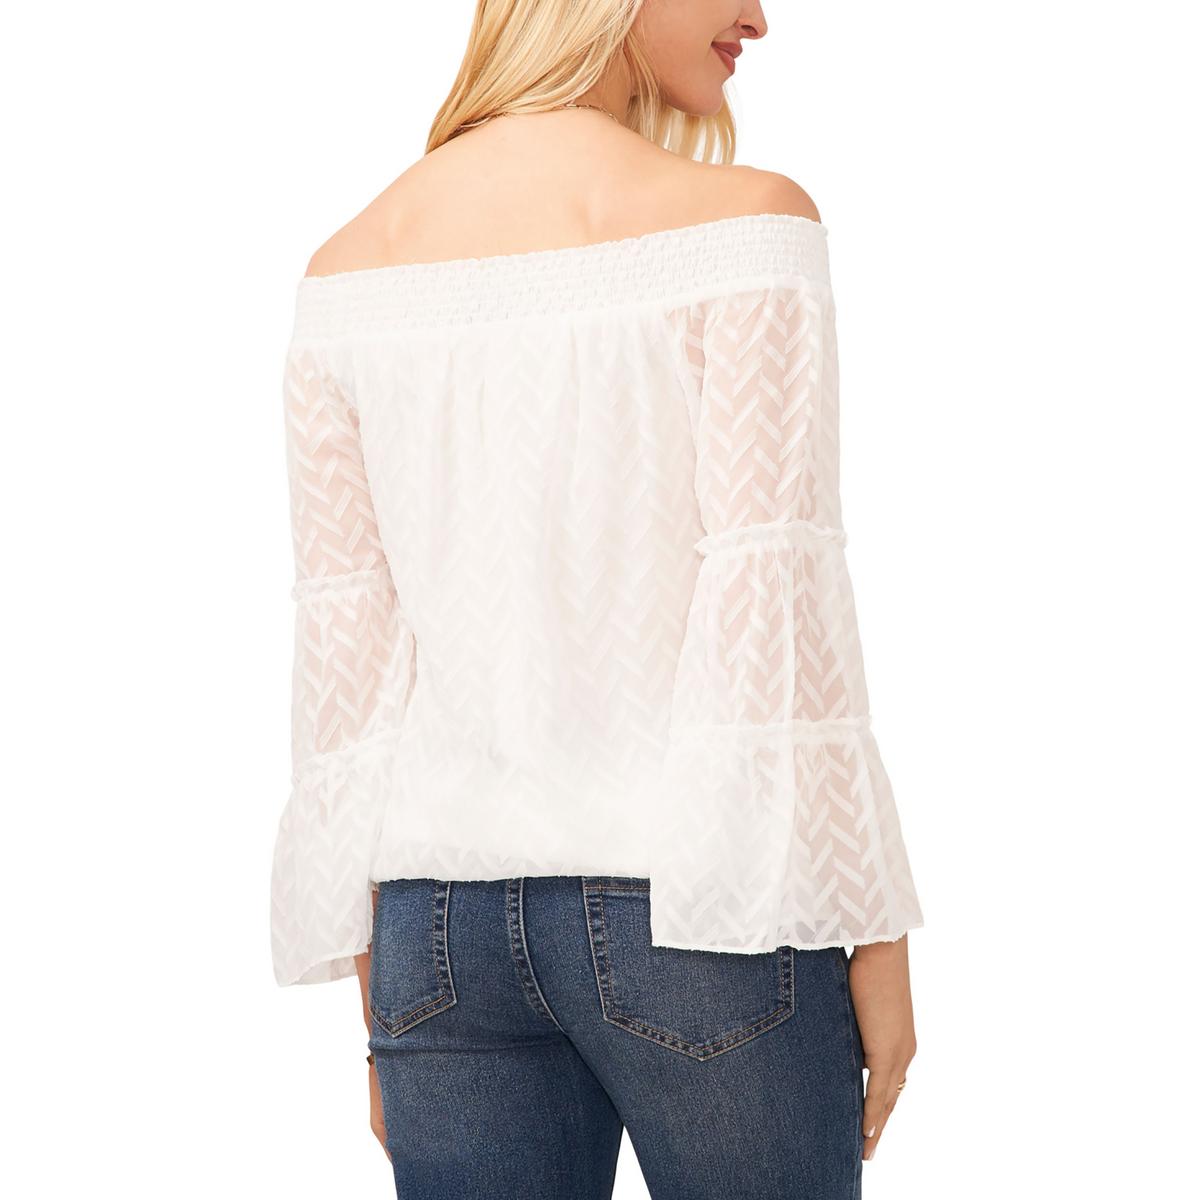 Sam and Jess Womens Chiffon Off-The-Shoulder Blouse